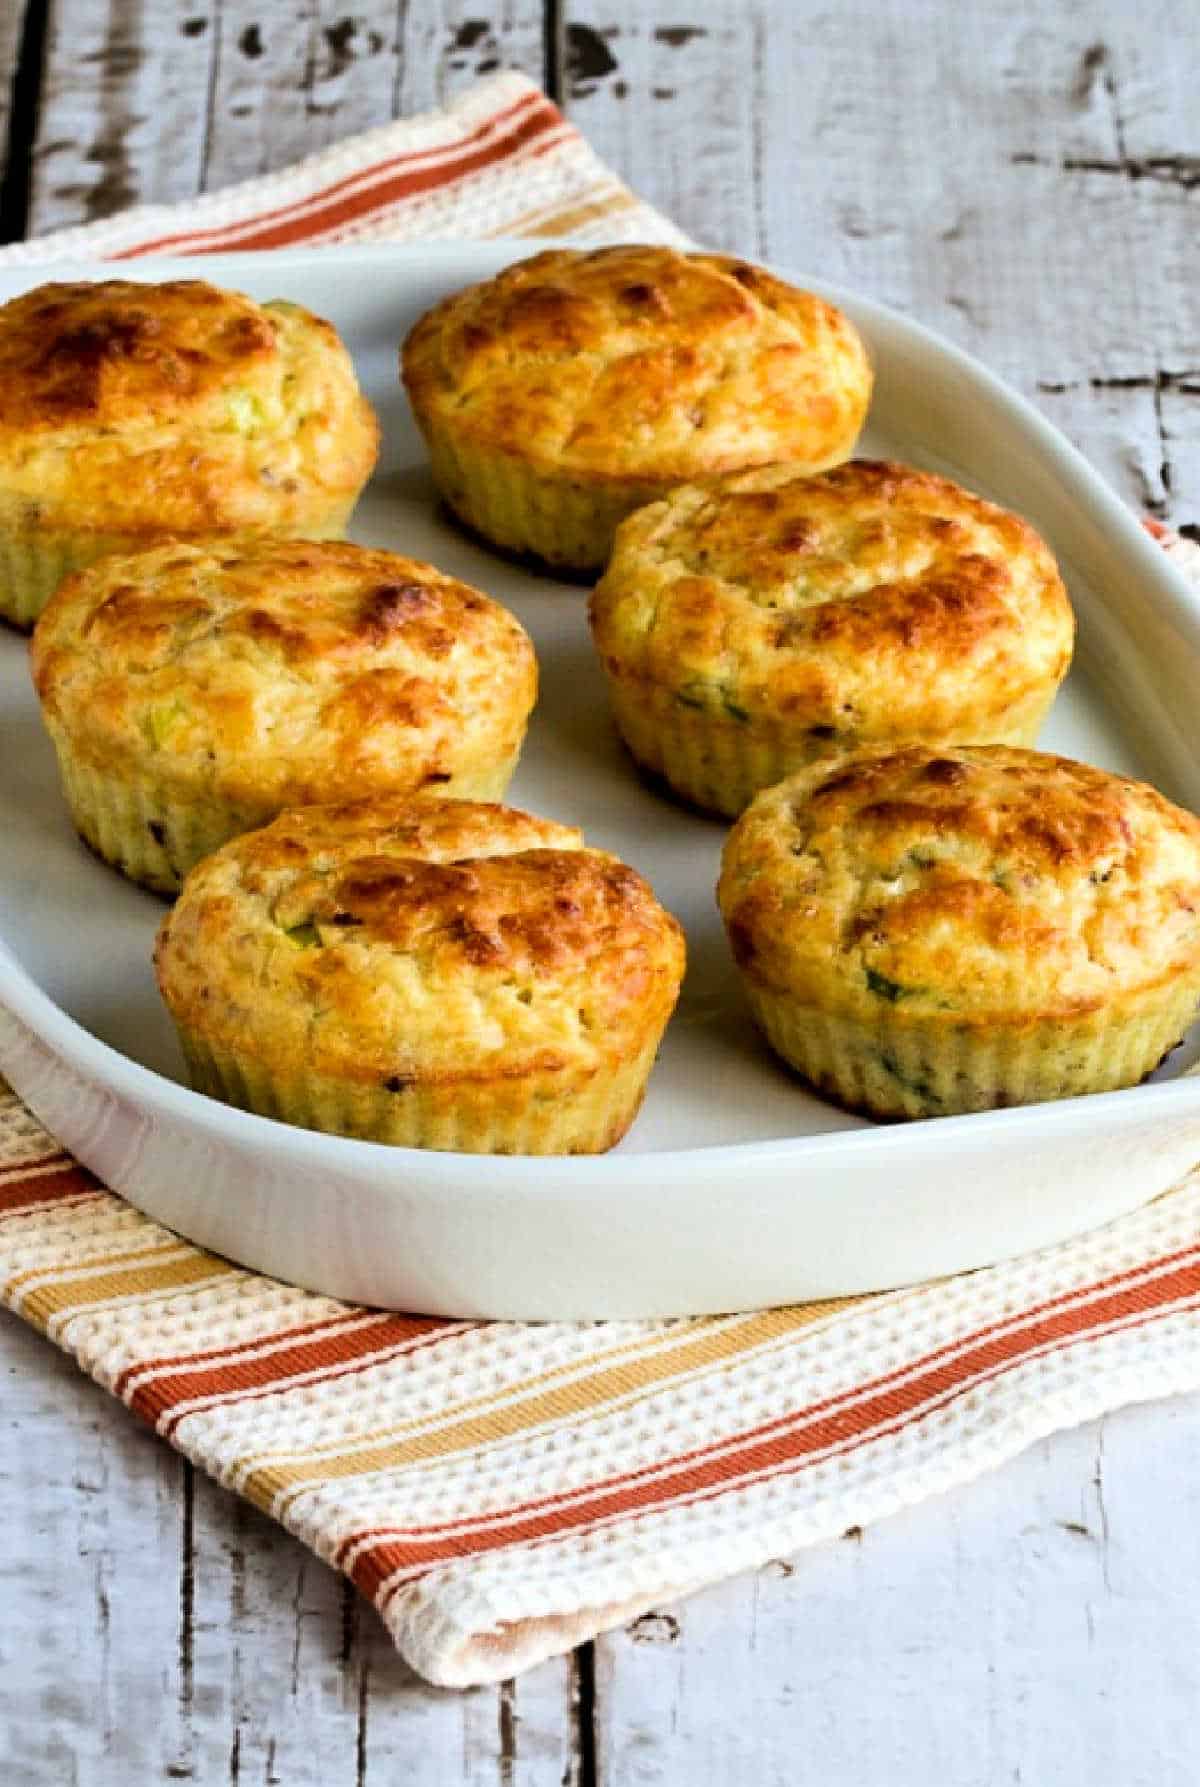 Cottage Cheese Breakfast Muffins with Bacon shown on serving plate